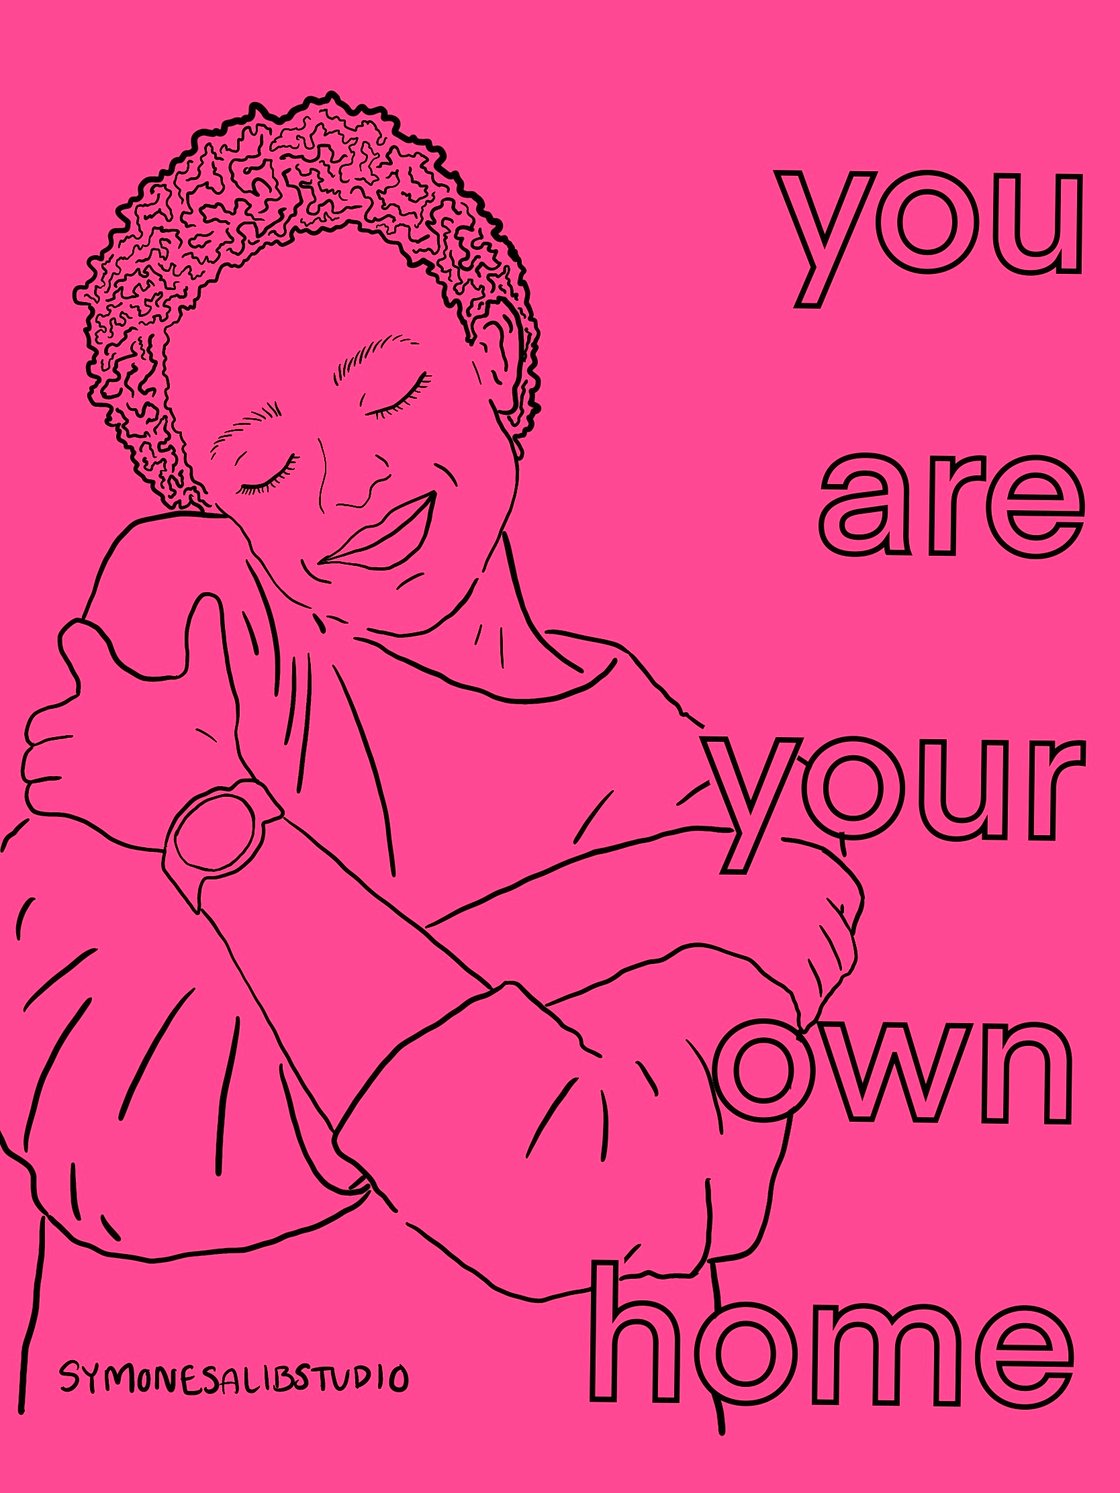 Image of You Are Your Own Home